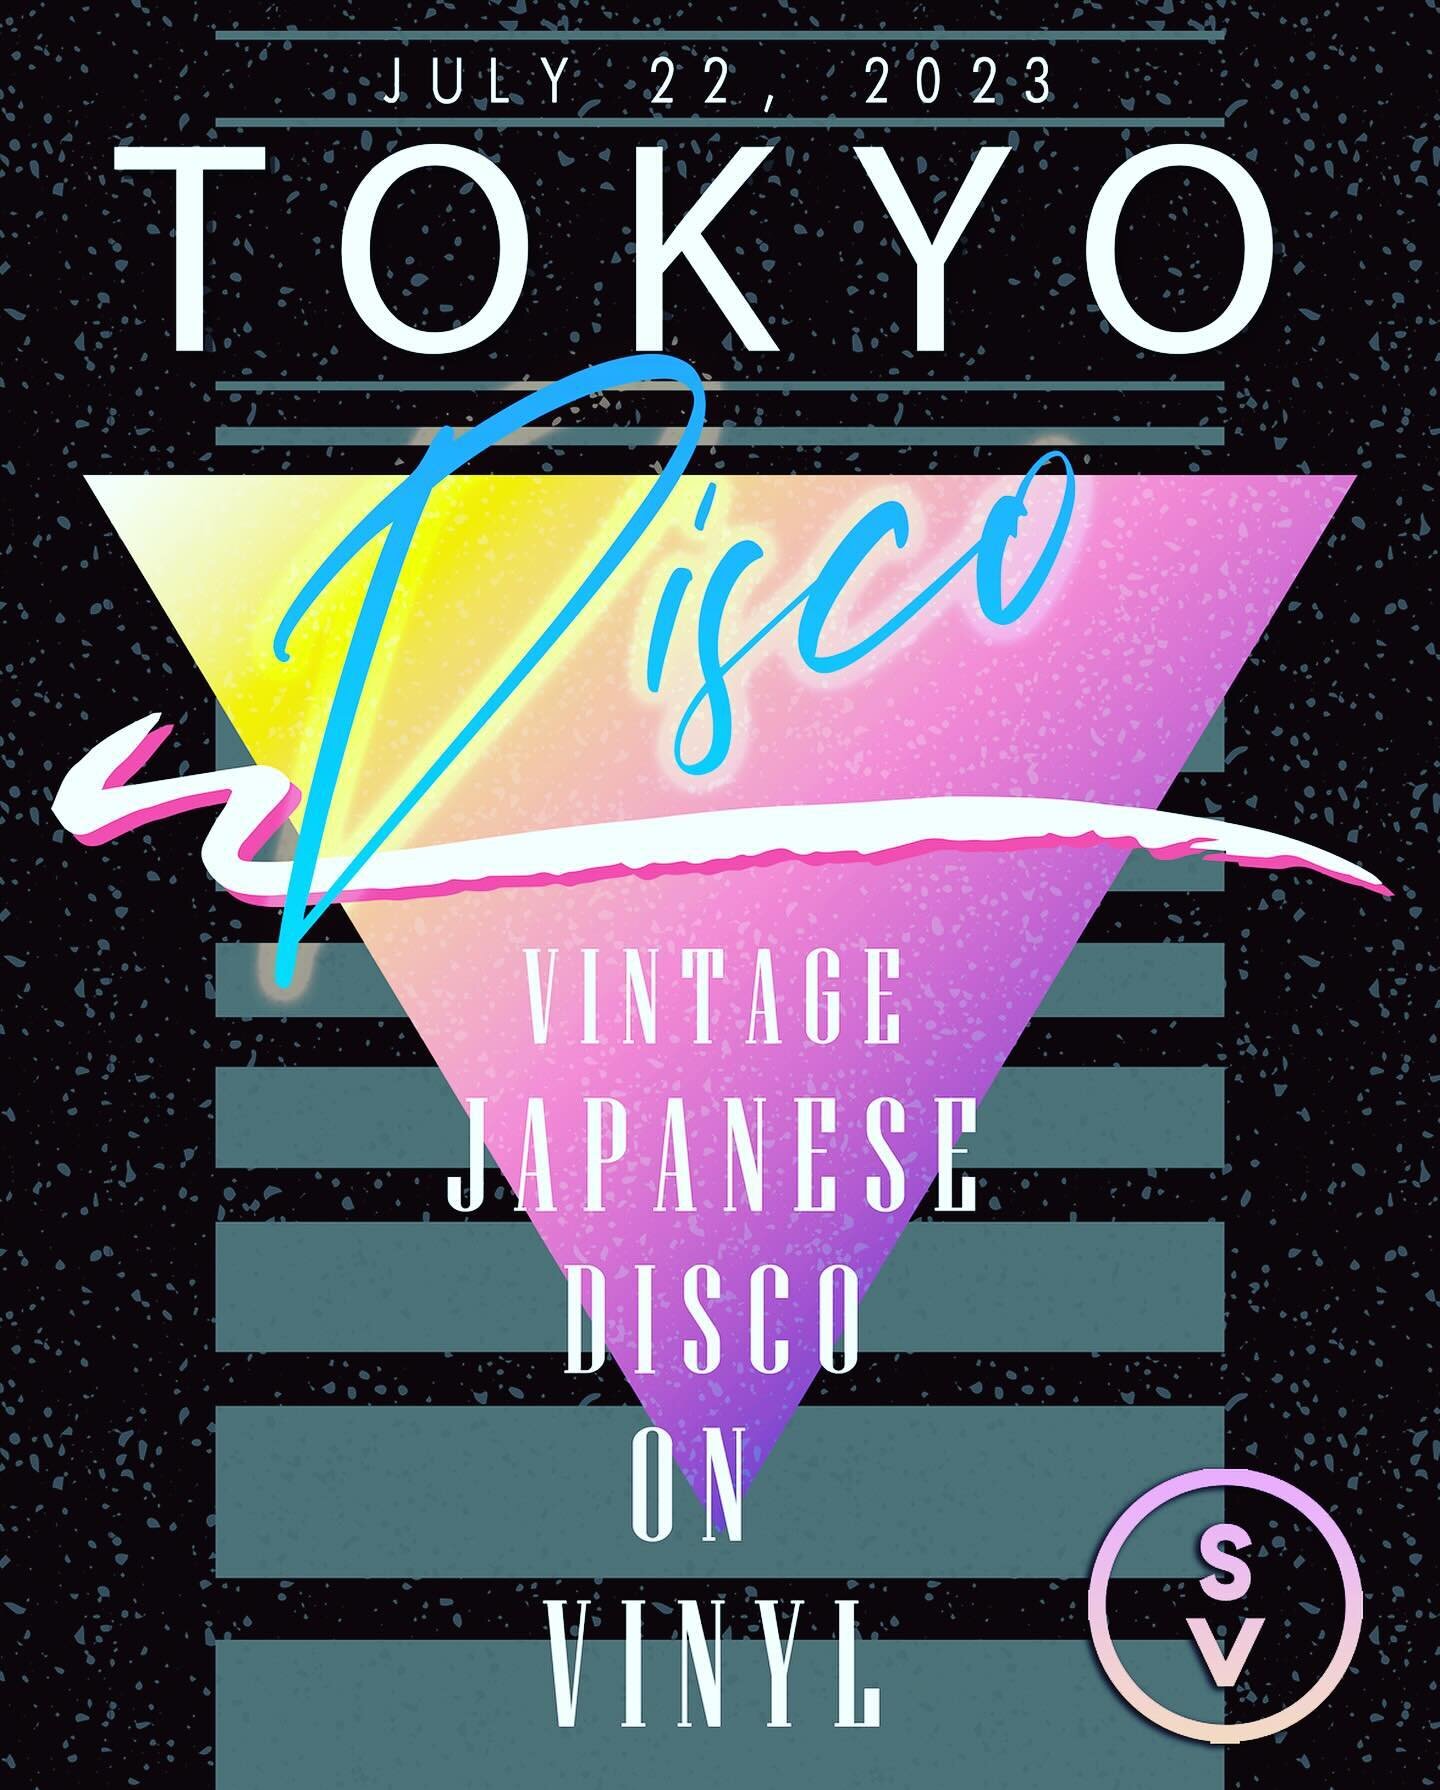 July 22 TOKYO DISCO at @sl33pingvillag3 returns! In preparation for my Japan tour this October I&rsquo;ll actually have some merch for sale. 

Come drink, dance, and bebop to some funk disco from the land of the rising sun with us 🎌🪩

21+
Free
9PM
